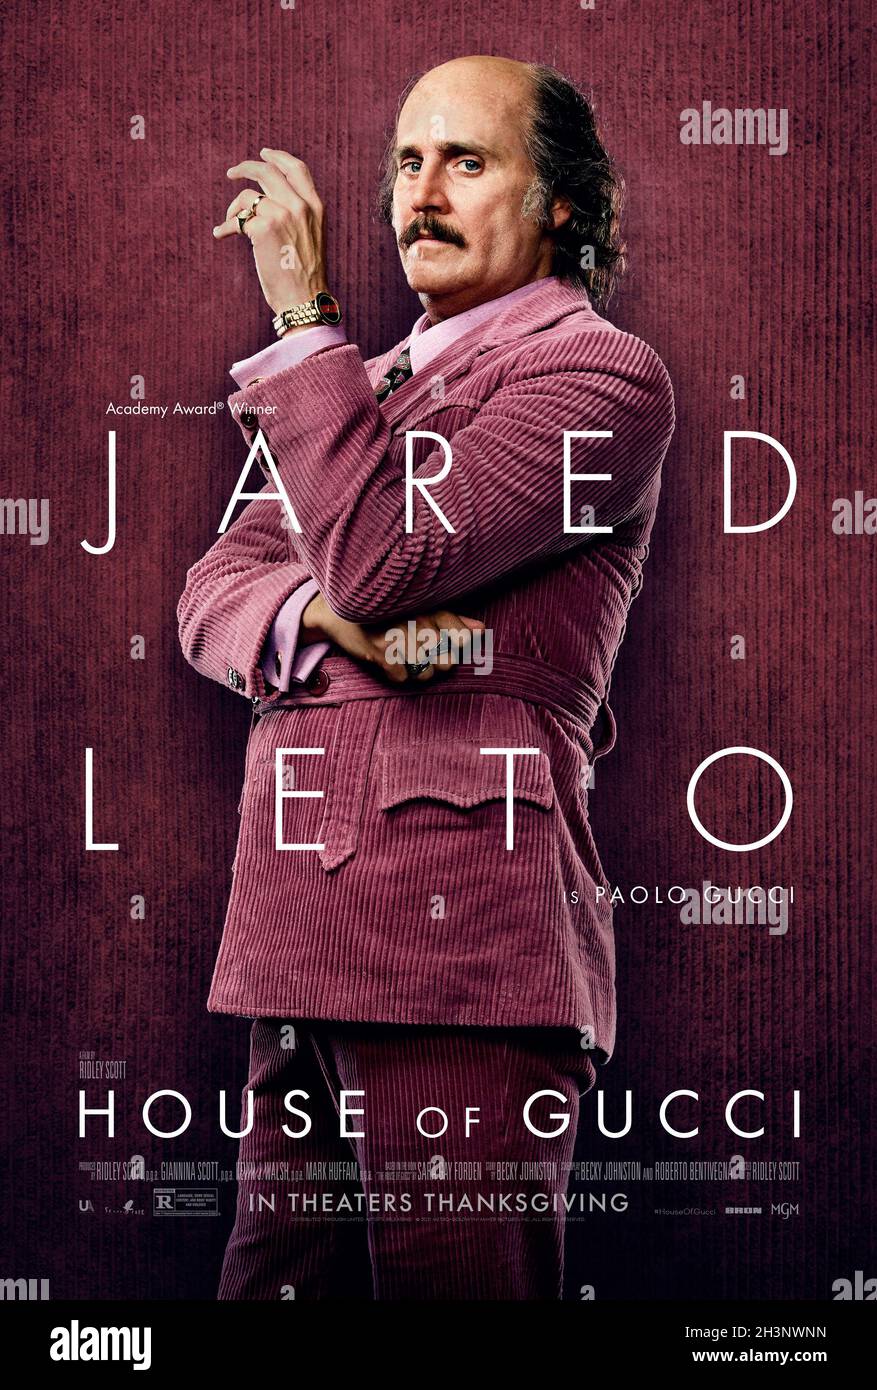 RELEASE DATE: November 24, 2021 TITLE: House of Gucci STUDIO: MGM DIRECTOR:  Ridley Scott PLOT: The story of how Patrizia Reggiani, the ex-wife of  Maurizio Gucci, plotted to kill her husband, the